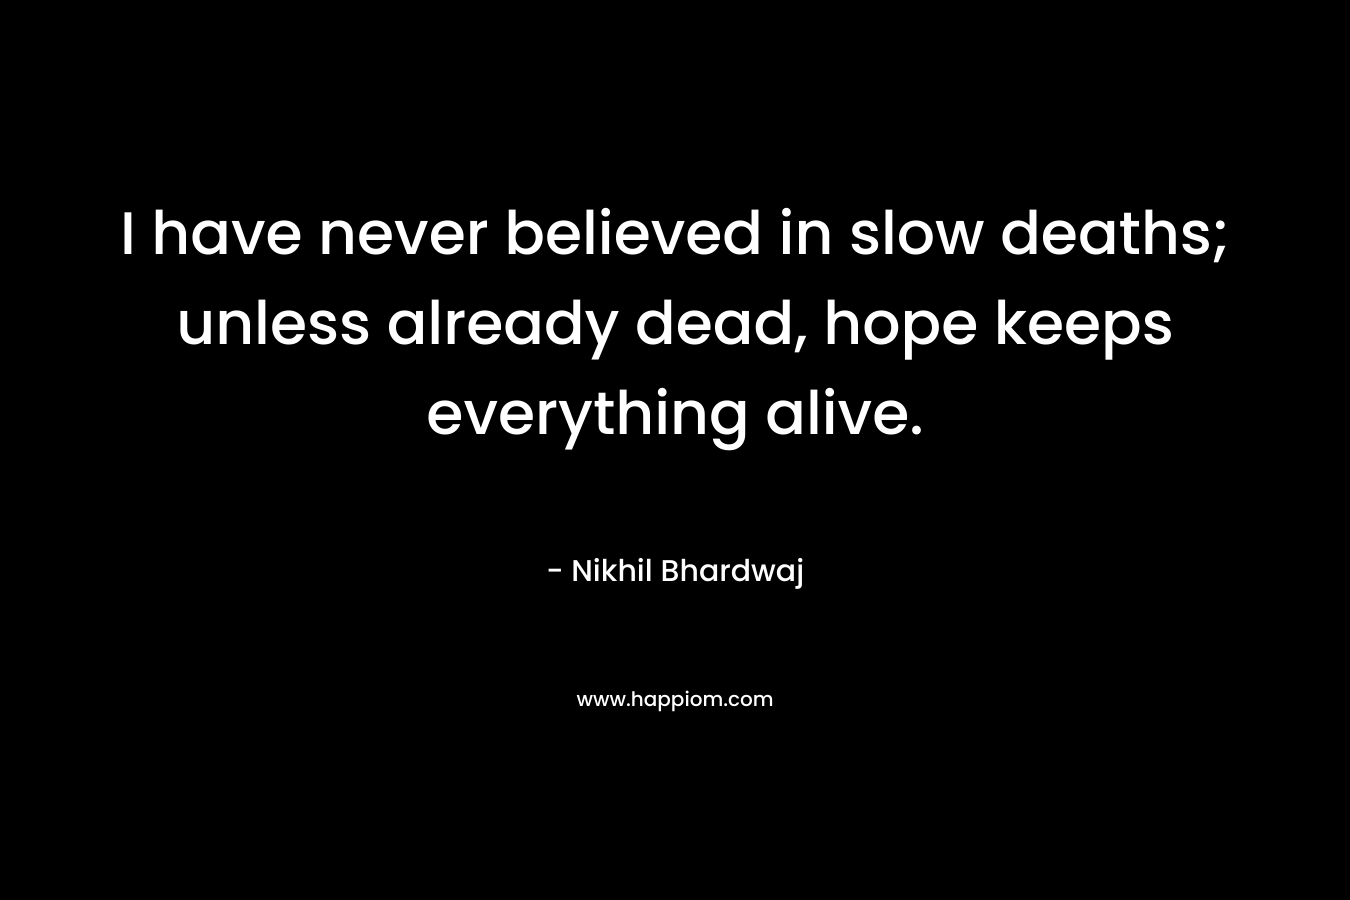 I have never believed in slow deaths; unless already dead, hope keeps everything alive.